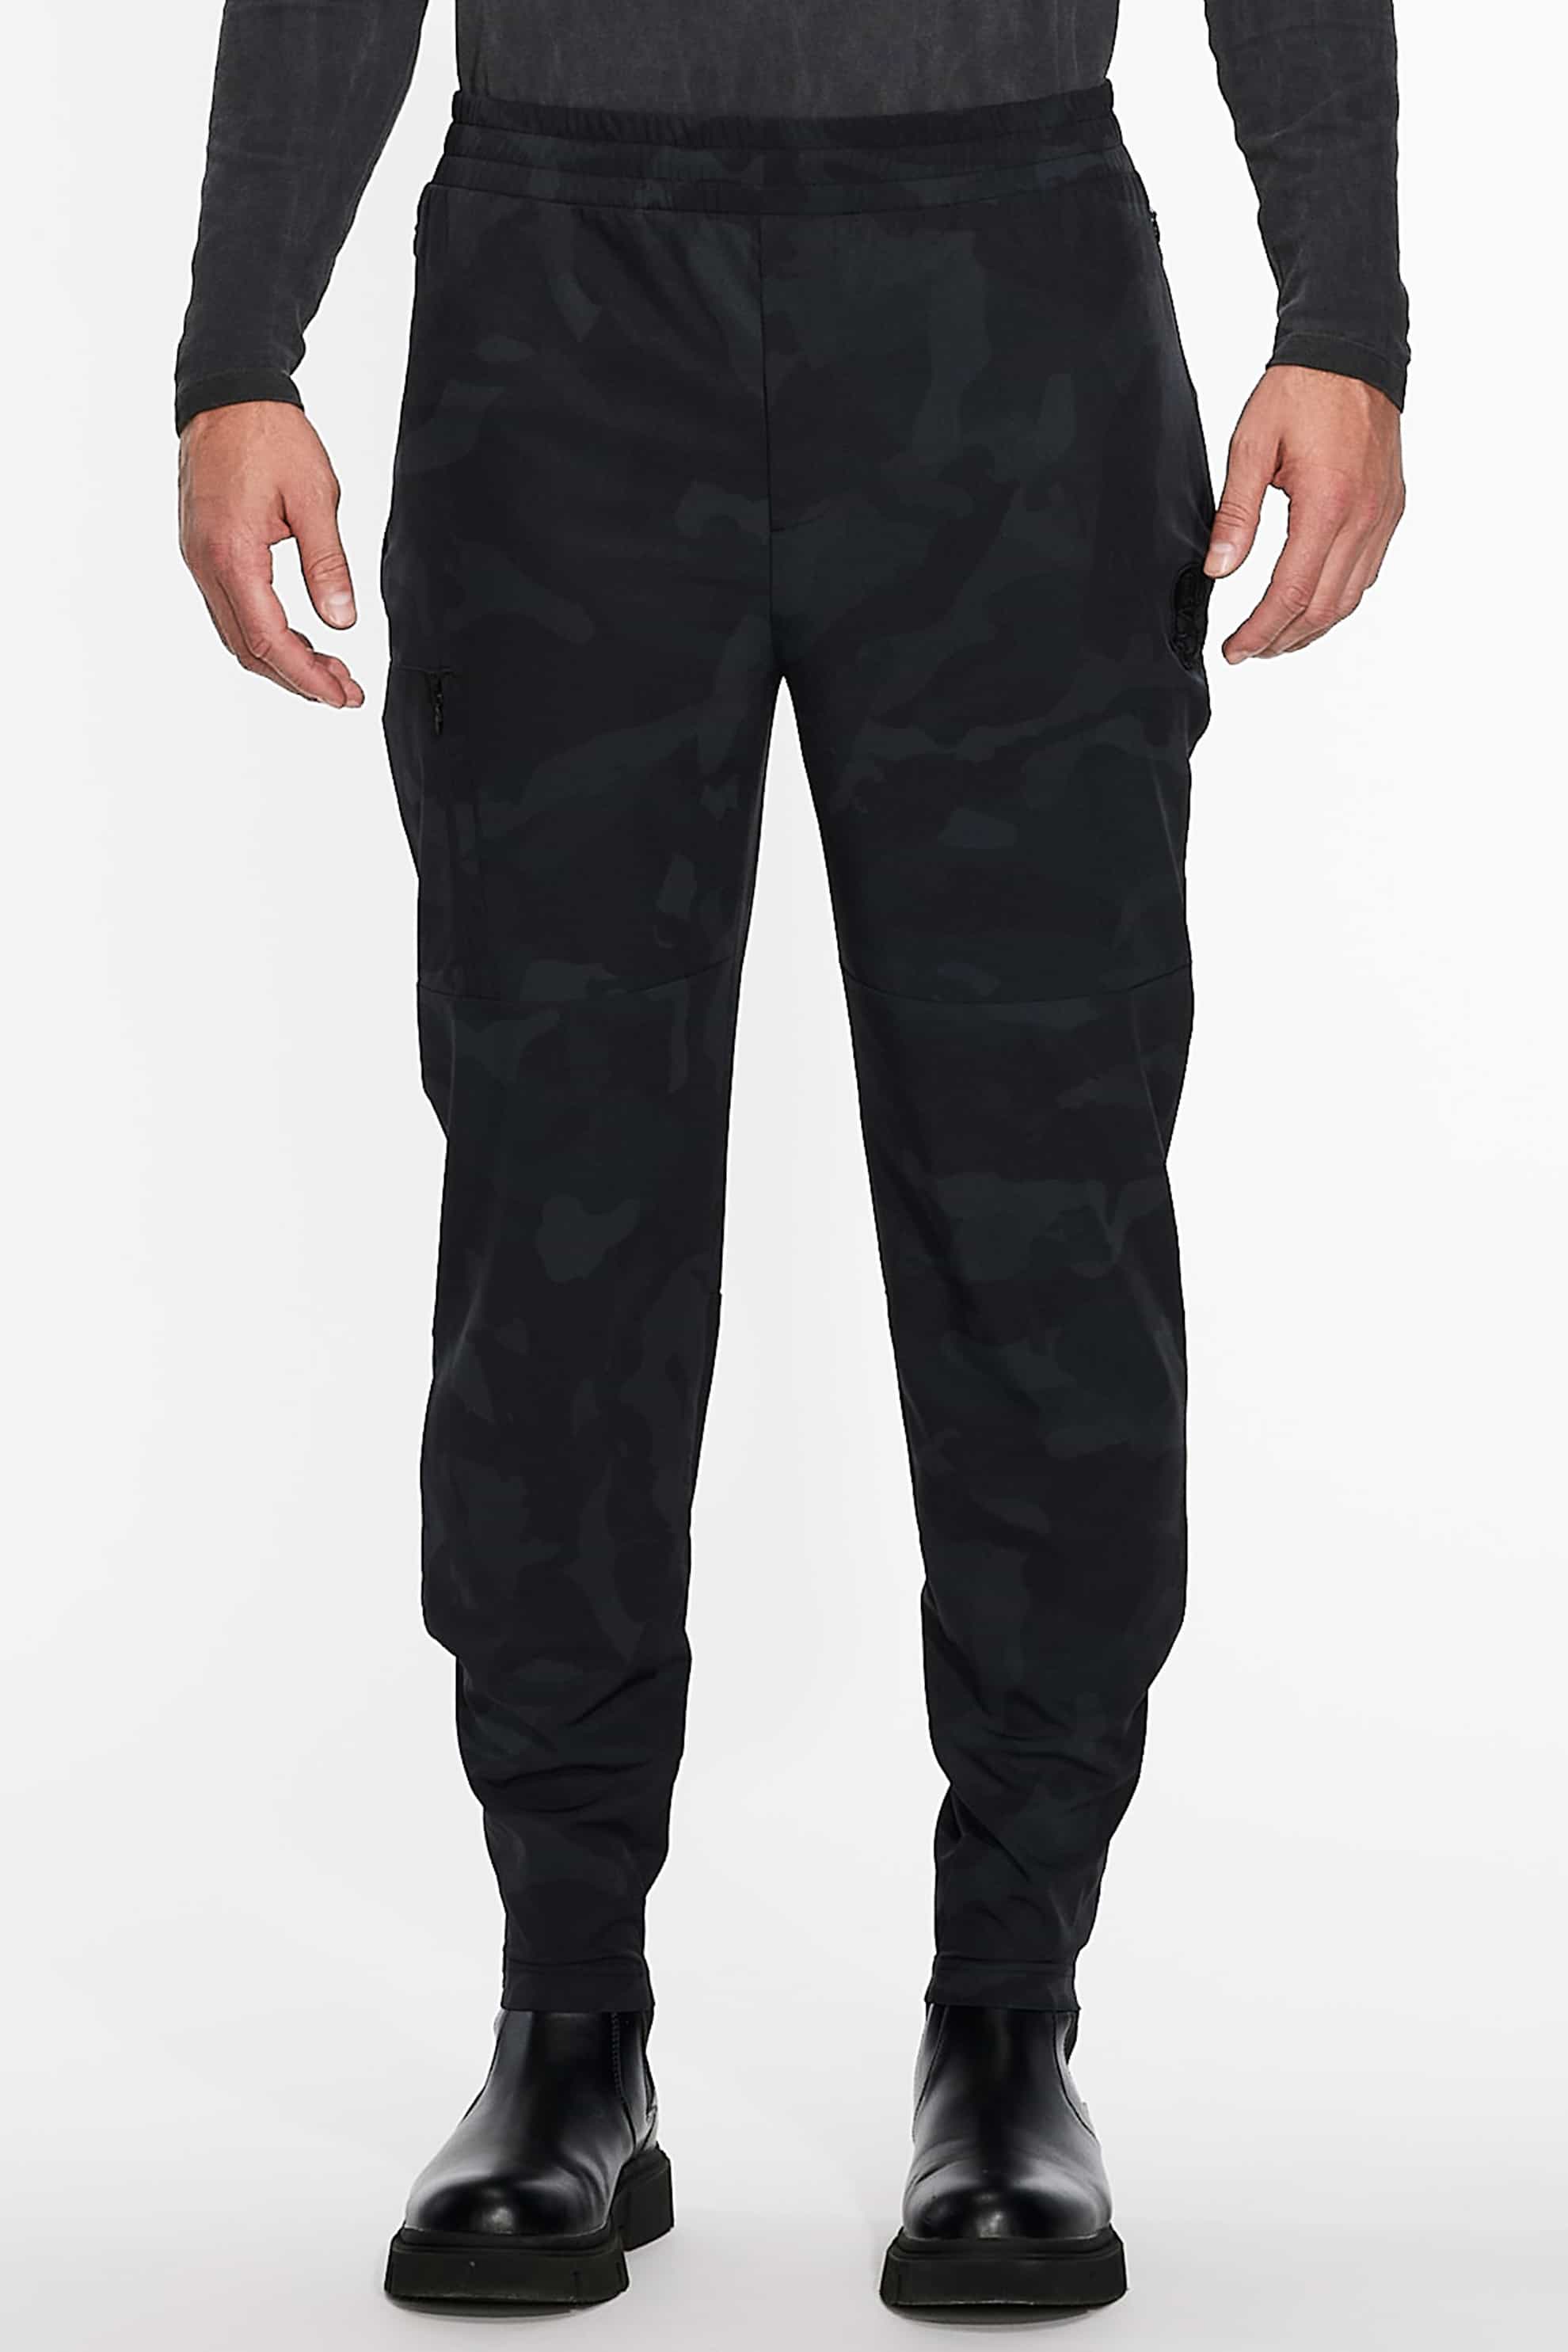 Fairway Camo Track Pants  Shop the Highest Quality Golf Apparel, Gear,  Accessories and Golf Clubs at PXG